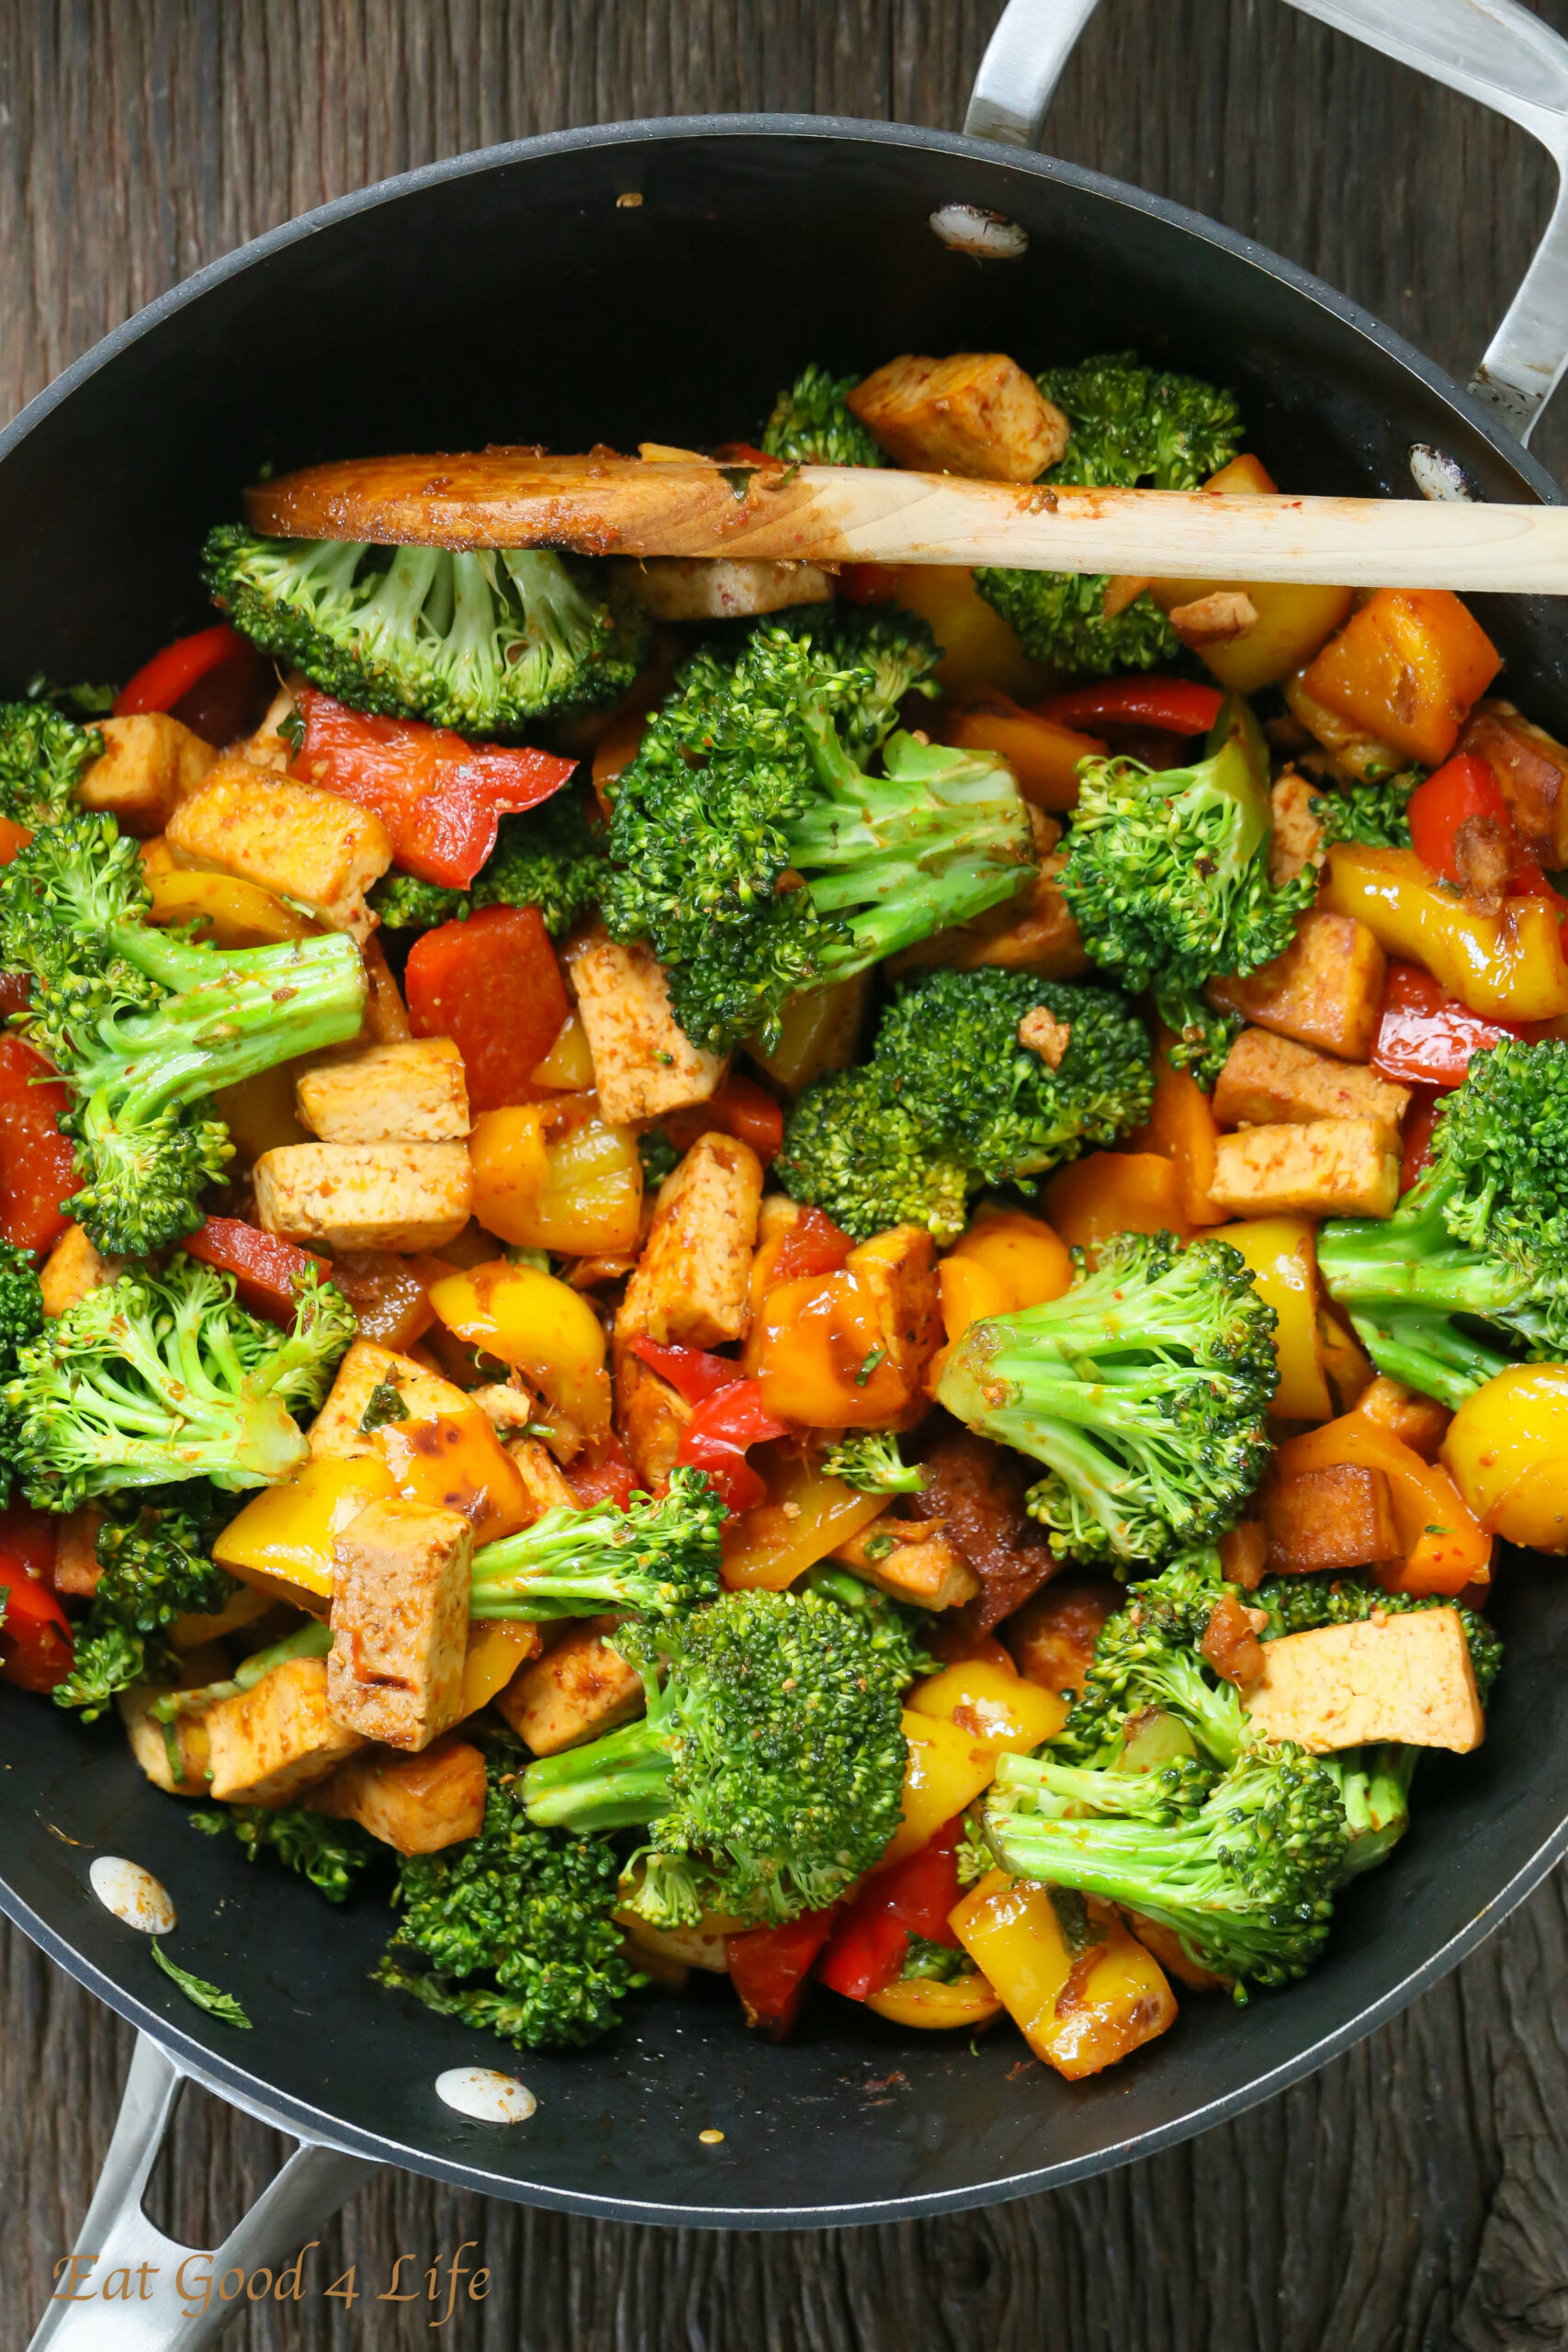 4 Yummy Stir-Fry Recipes - The Dolce Diet